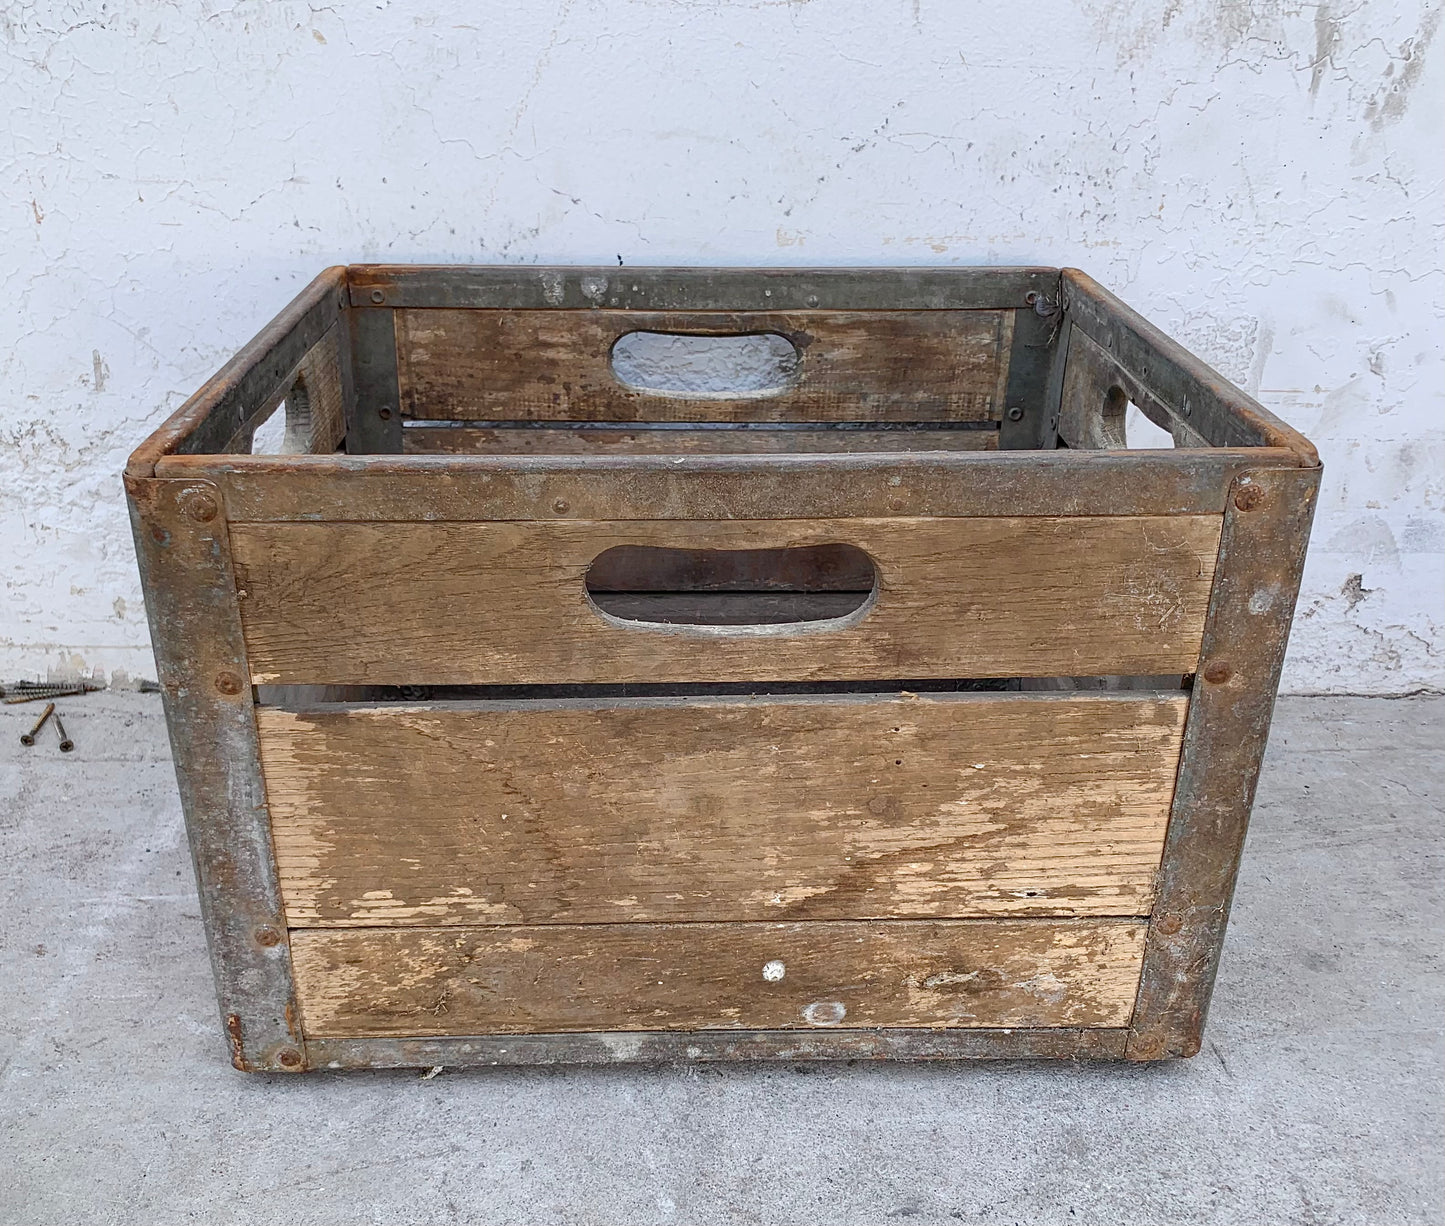 Wooden Dairy Crate